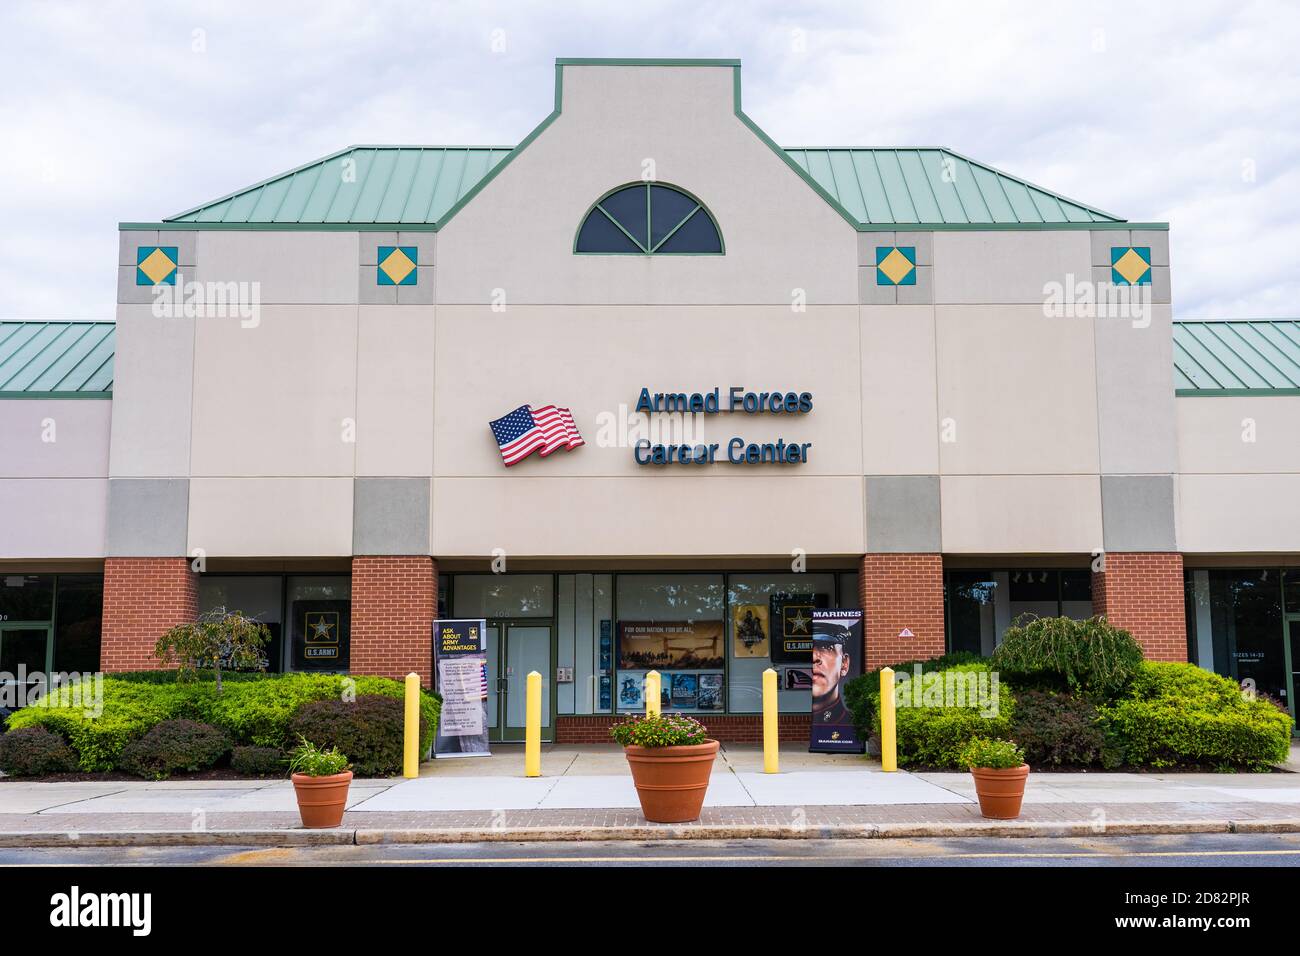 Mays Landing - Oct. 2, 2020: The Armed Forces Career Center is in the Consumer Square Mall. Stock Photo